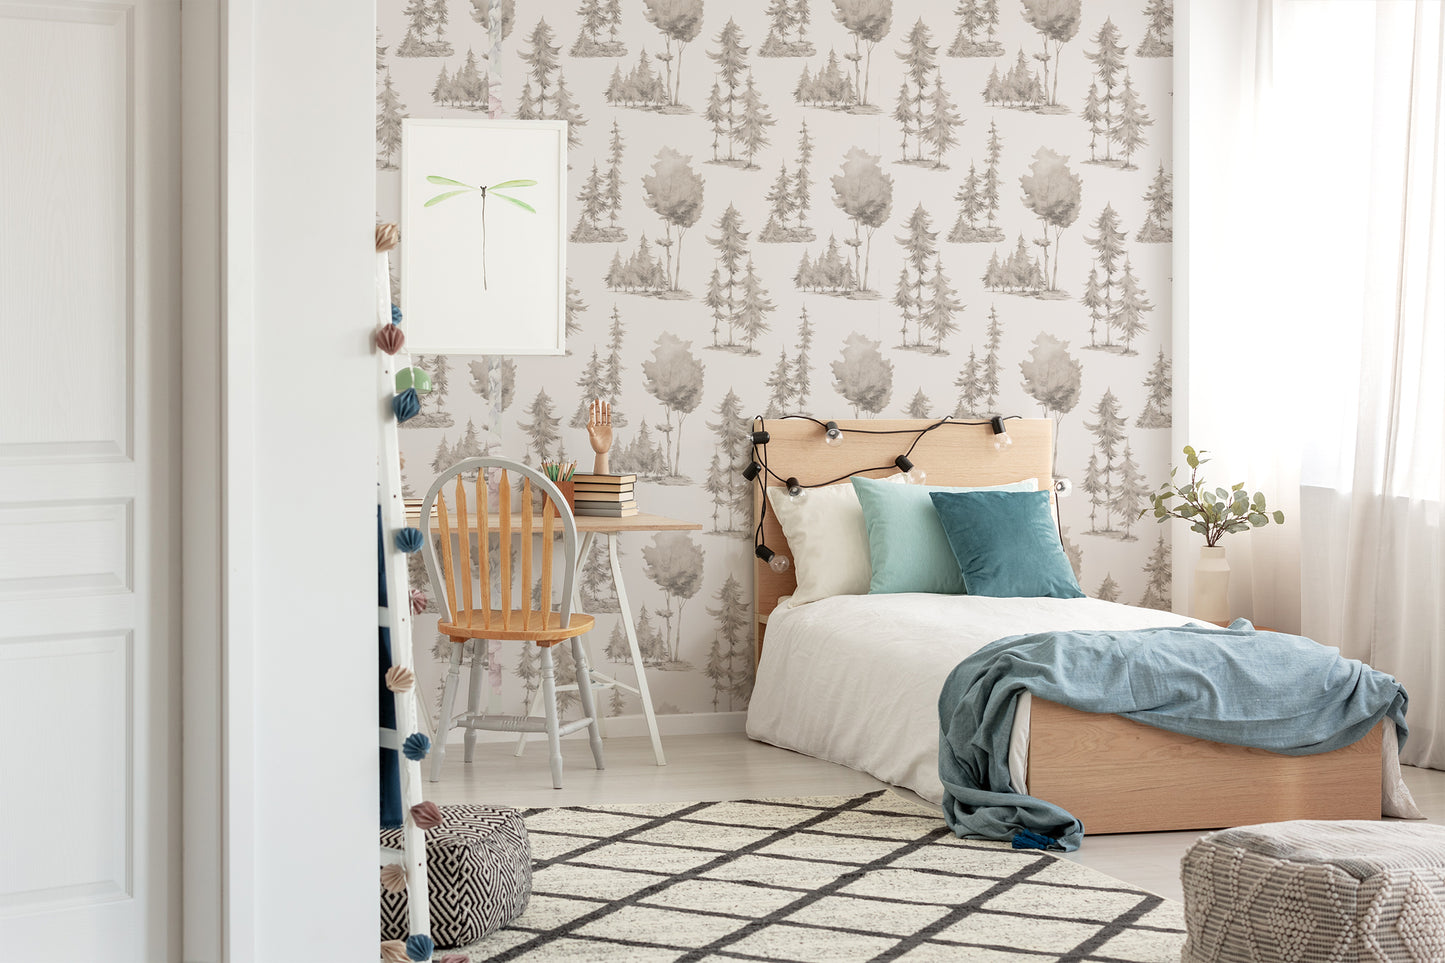 Quiet Little Trees Removable Peel And Stick Wallpaper